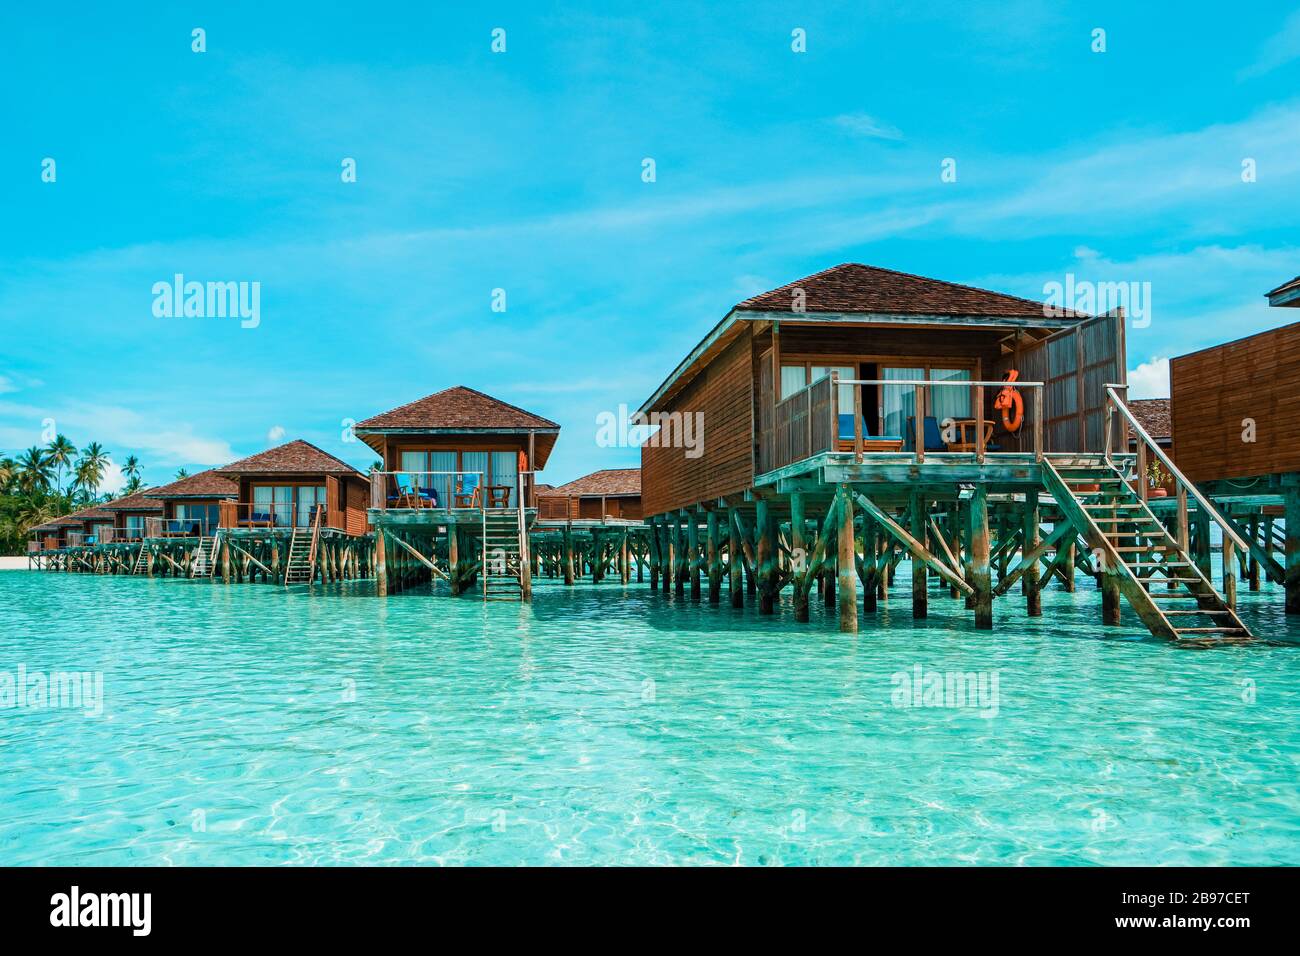 Maldives tropical Island, beautiful isolated luxury water bungalows Maldives in the blue green ocean of the maldives Stock Photo